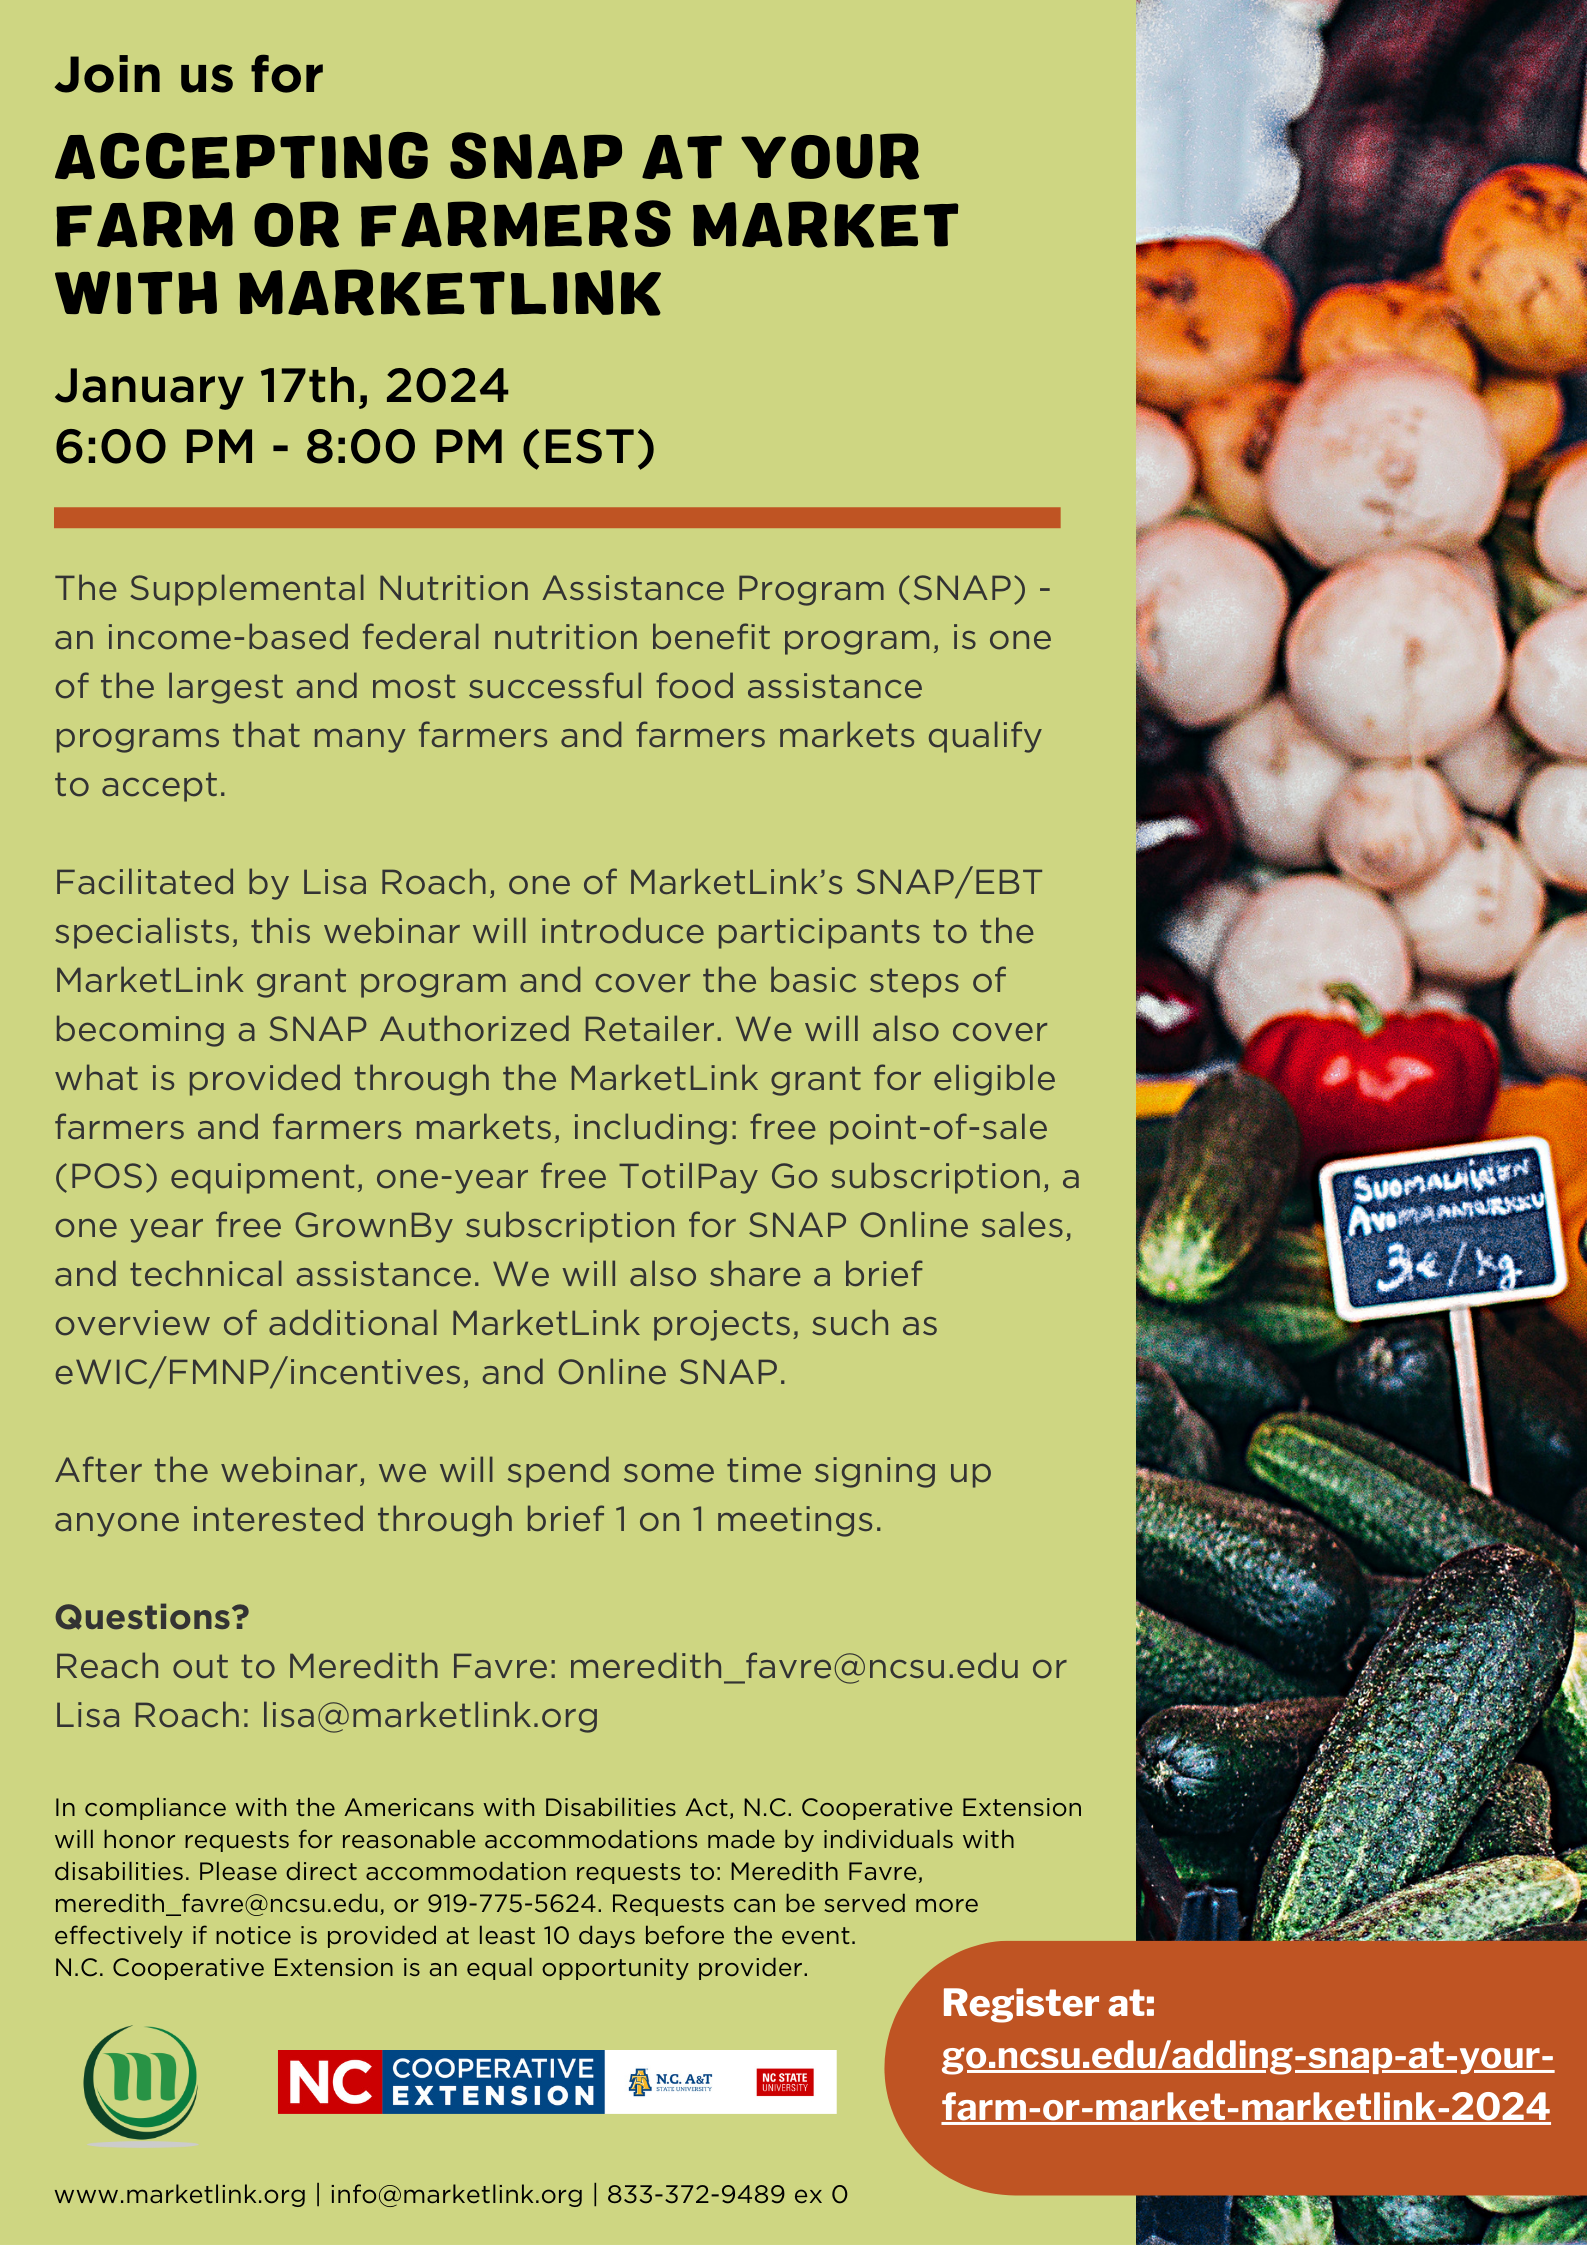 Flyer announcement details on this upcoming webinar to help farmers and farmers' markets learn about services available through MarketLink to accept SNAP benefits 